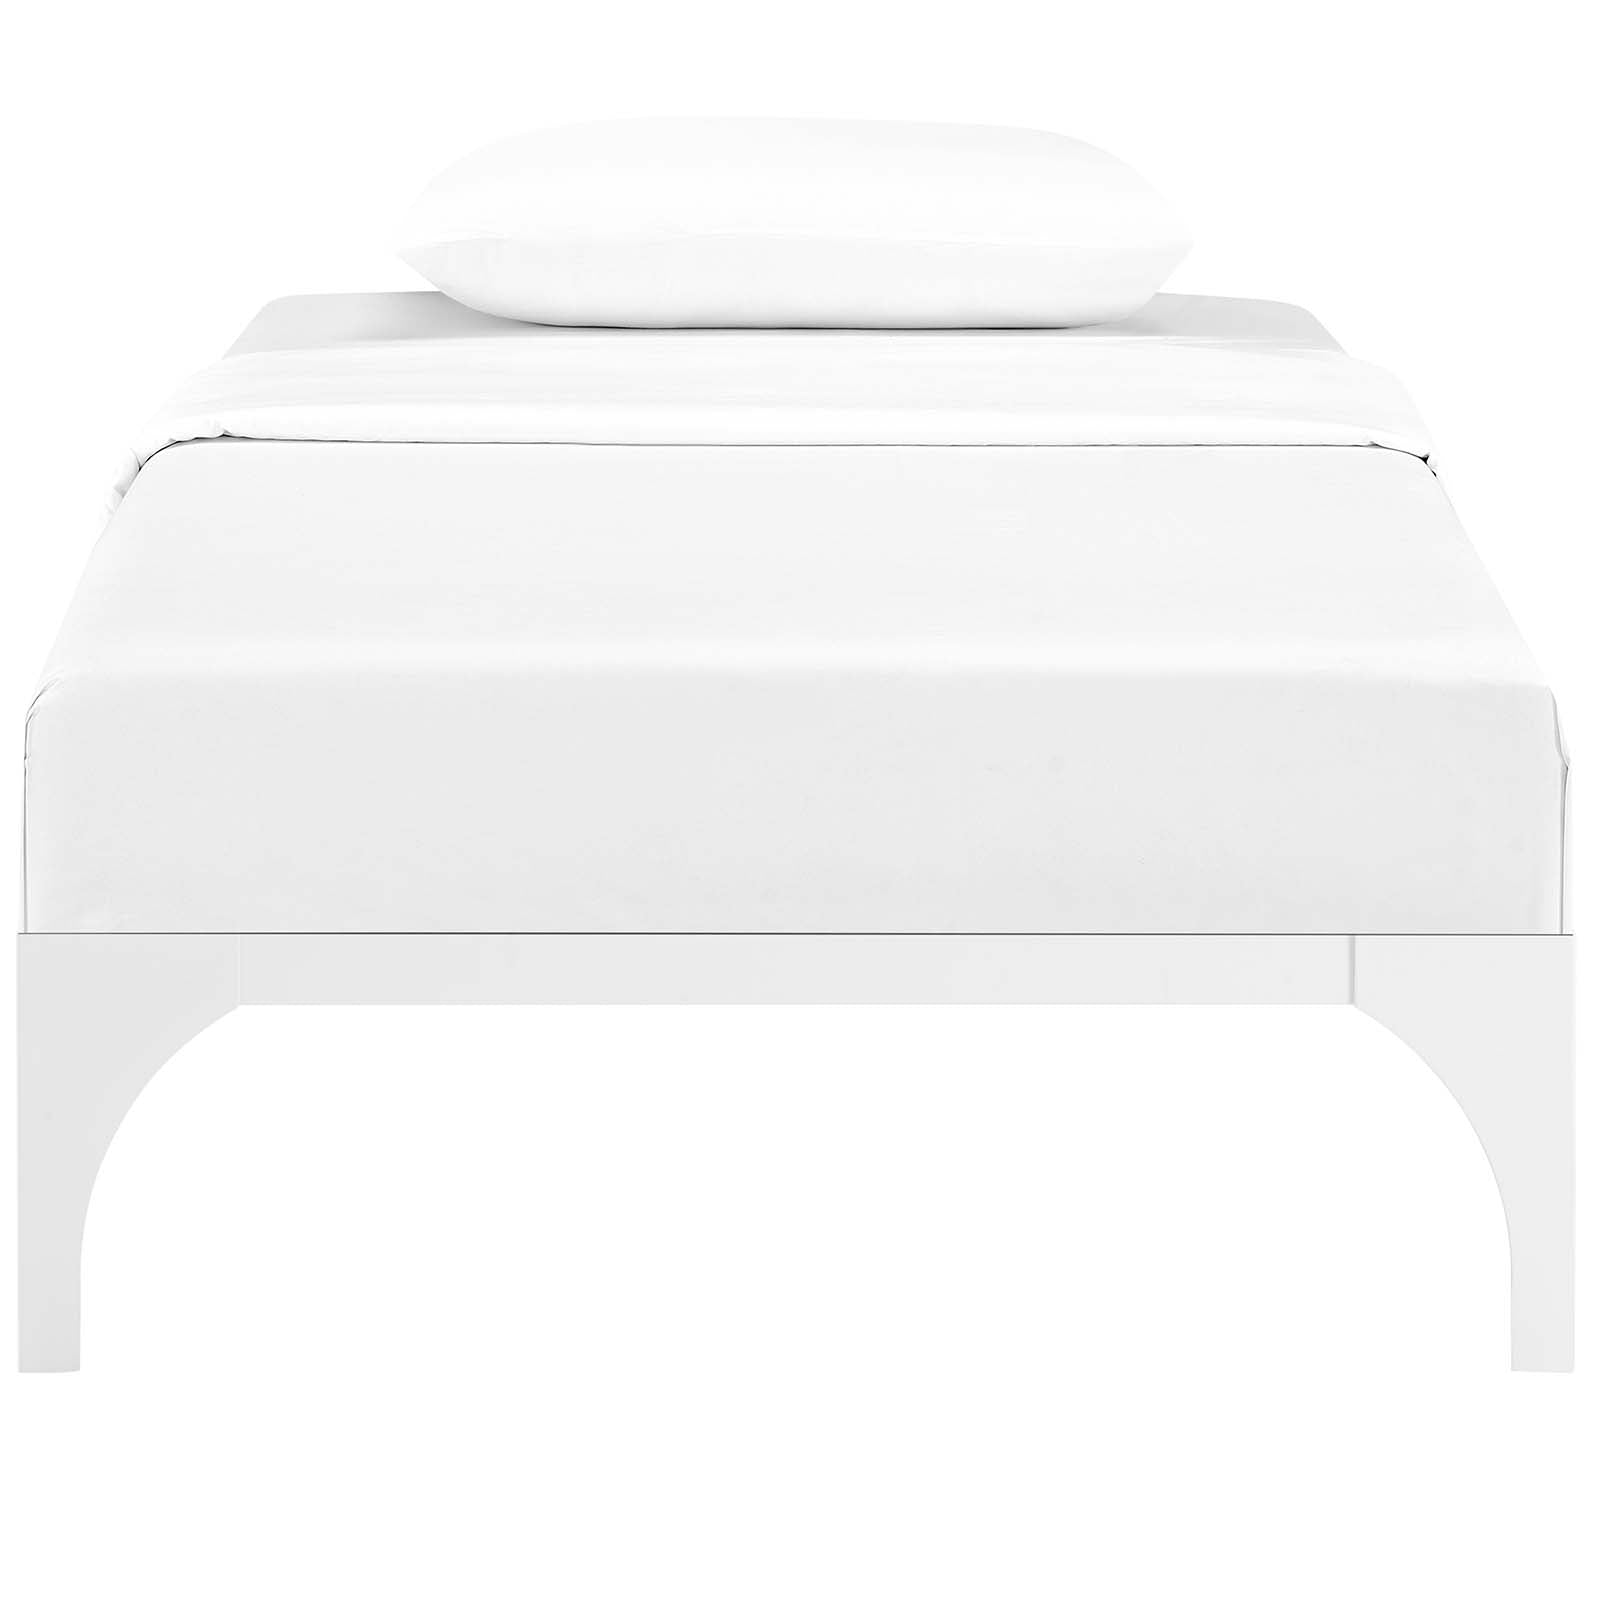 Modway Beds - Ollie Twin Bed Frame White